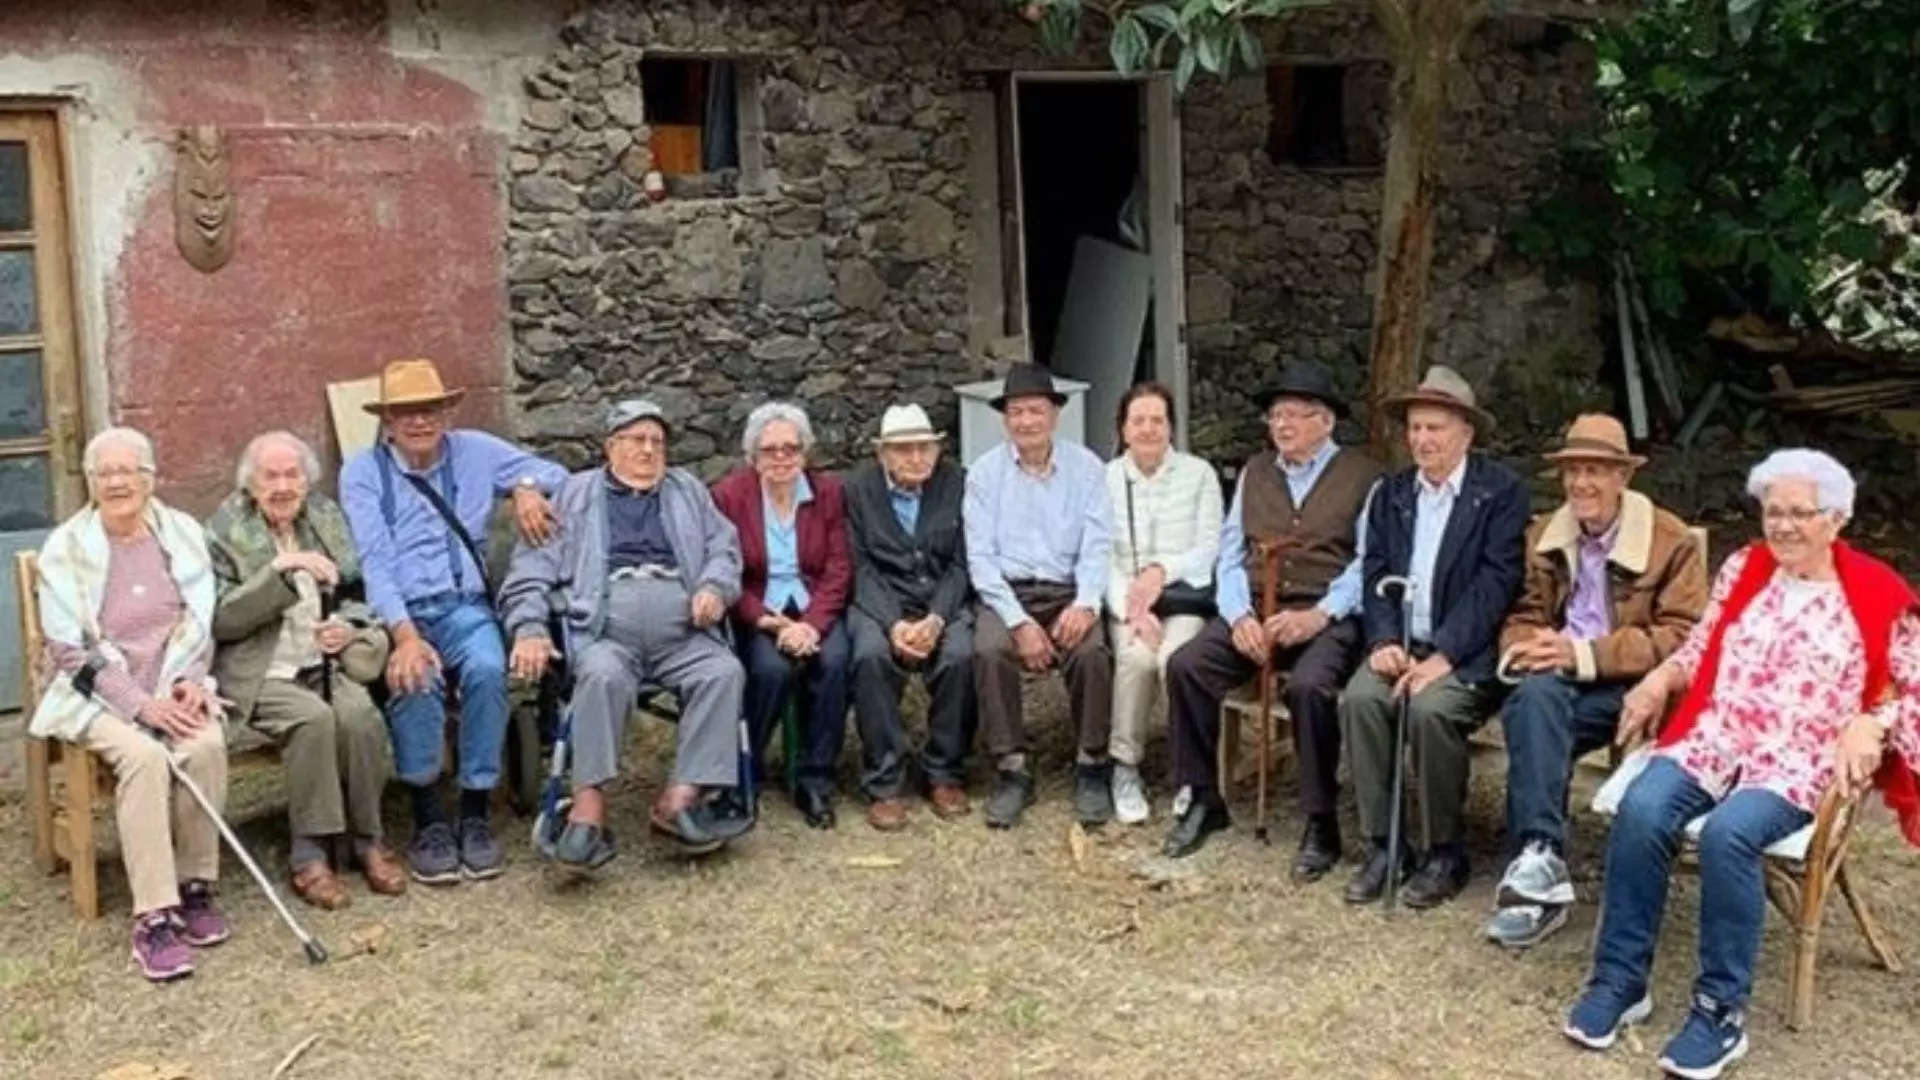 With the total age of 1058 years, 12 siblings of Spain broke the Guinness World Record